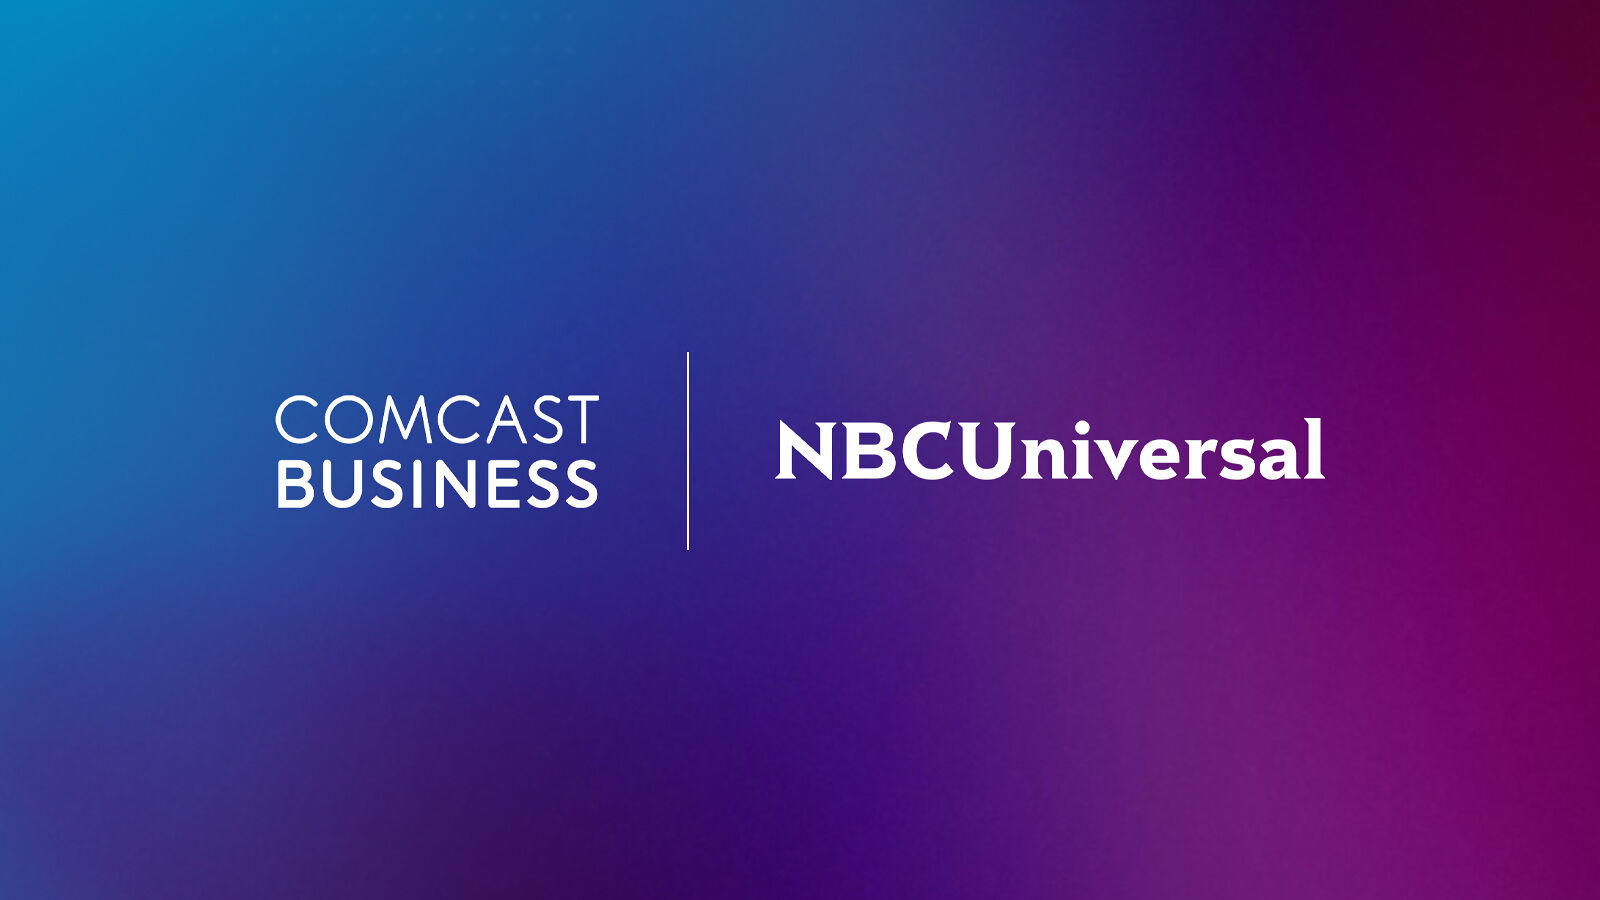 Comcast Business and NBCUniversal logos on purple gradient background